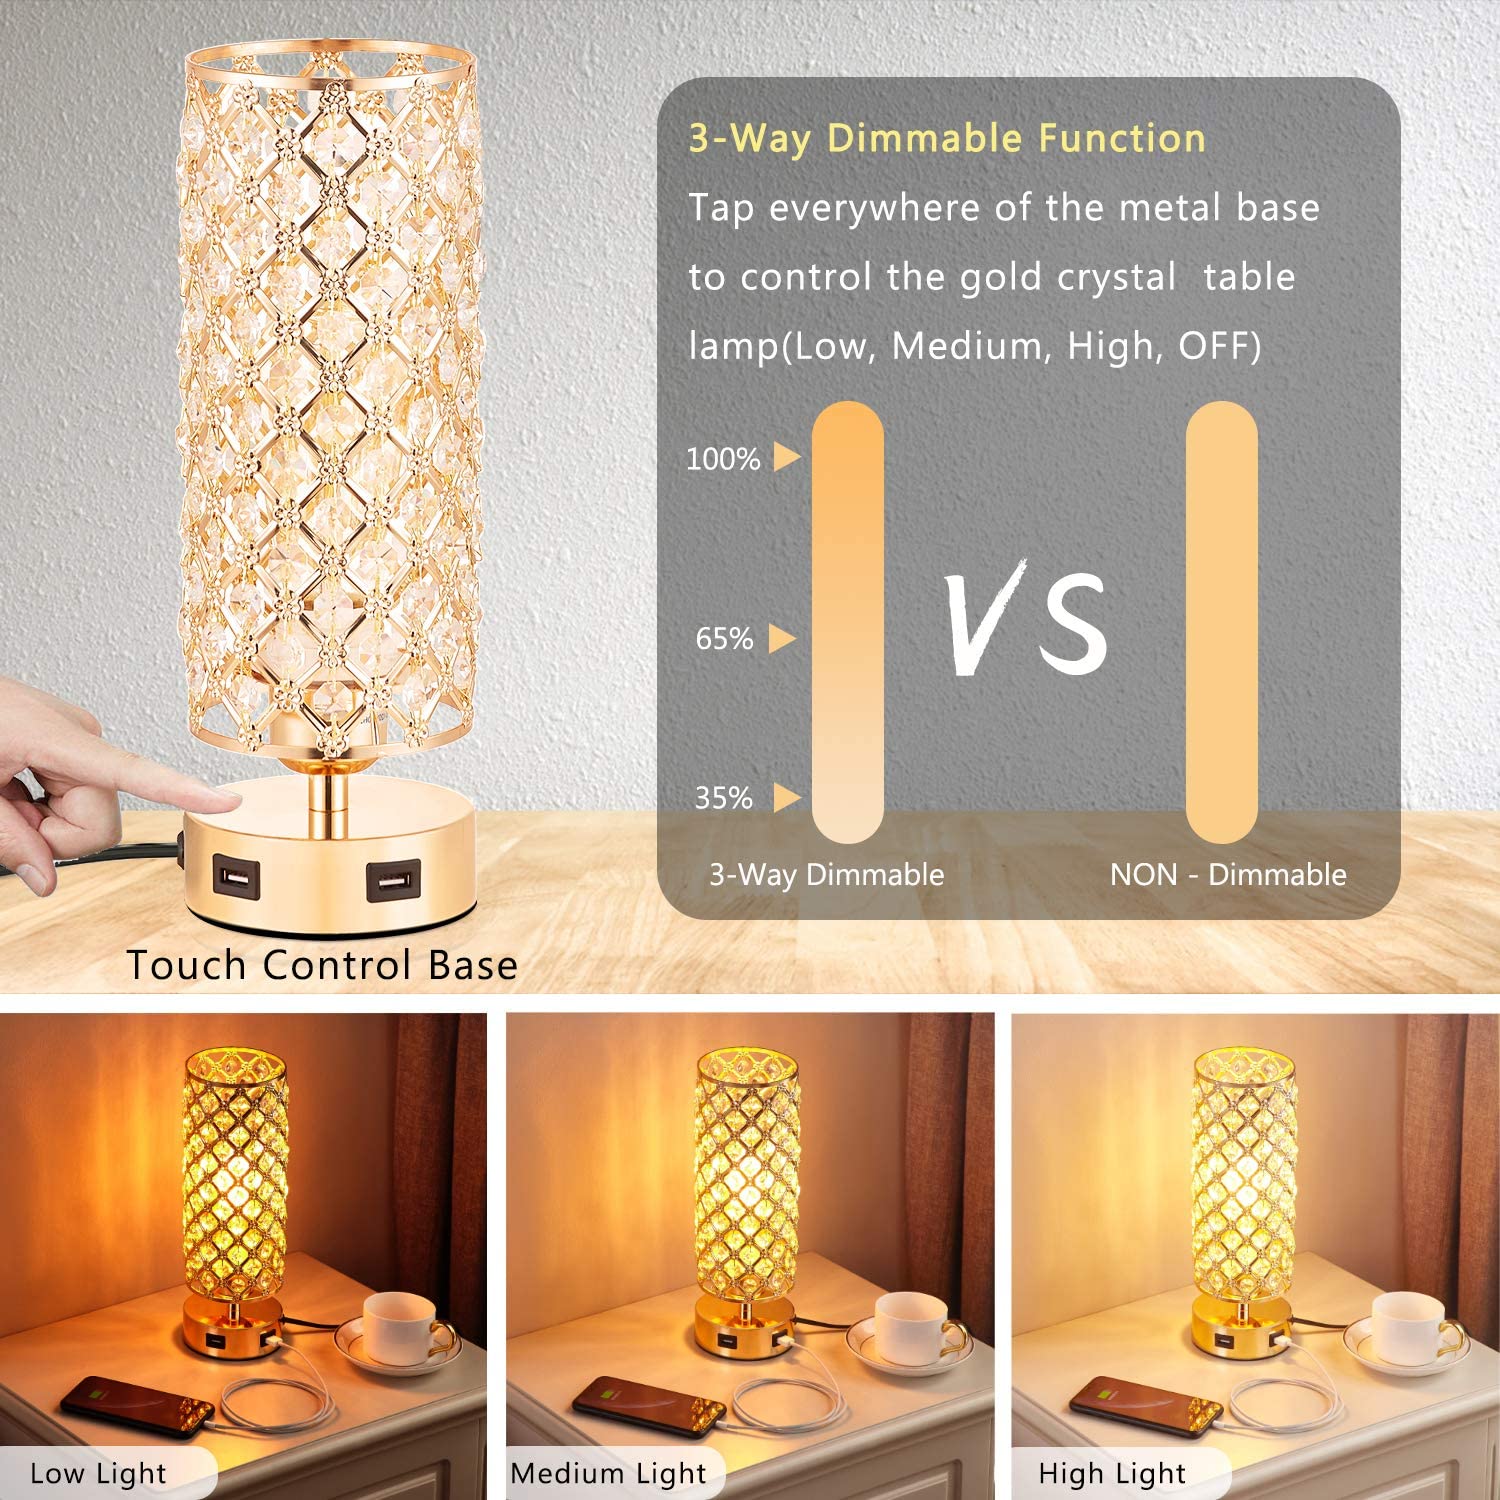 Touch Control USB Crystal Small Lamp, Dimmable Nightstand Lamp with Dual USB Port, 3-Way Gold Crystal Lamp with Bulb, Bedside Desk Light for Bedroom Living Room Entryway Home Office(Bulb Included) - image 3 of 7